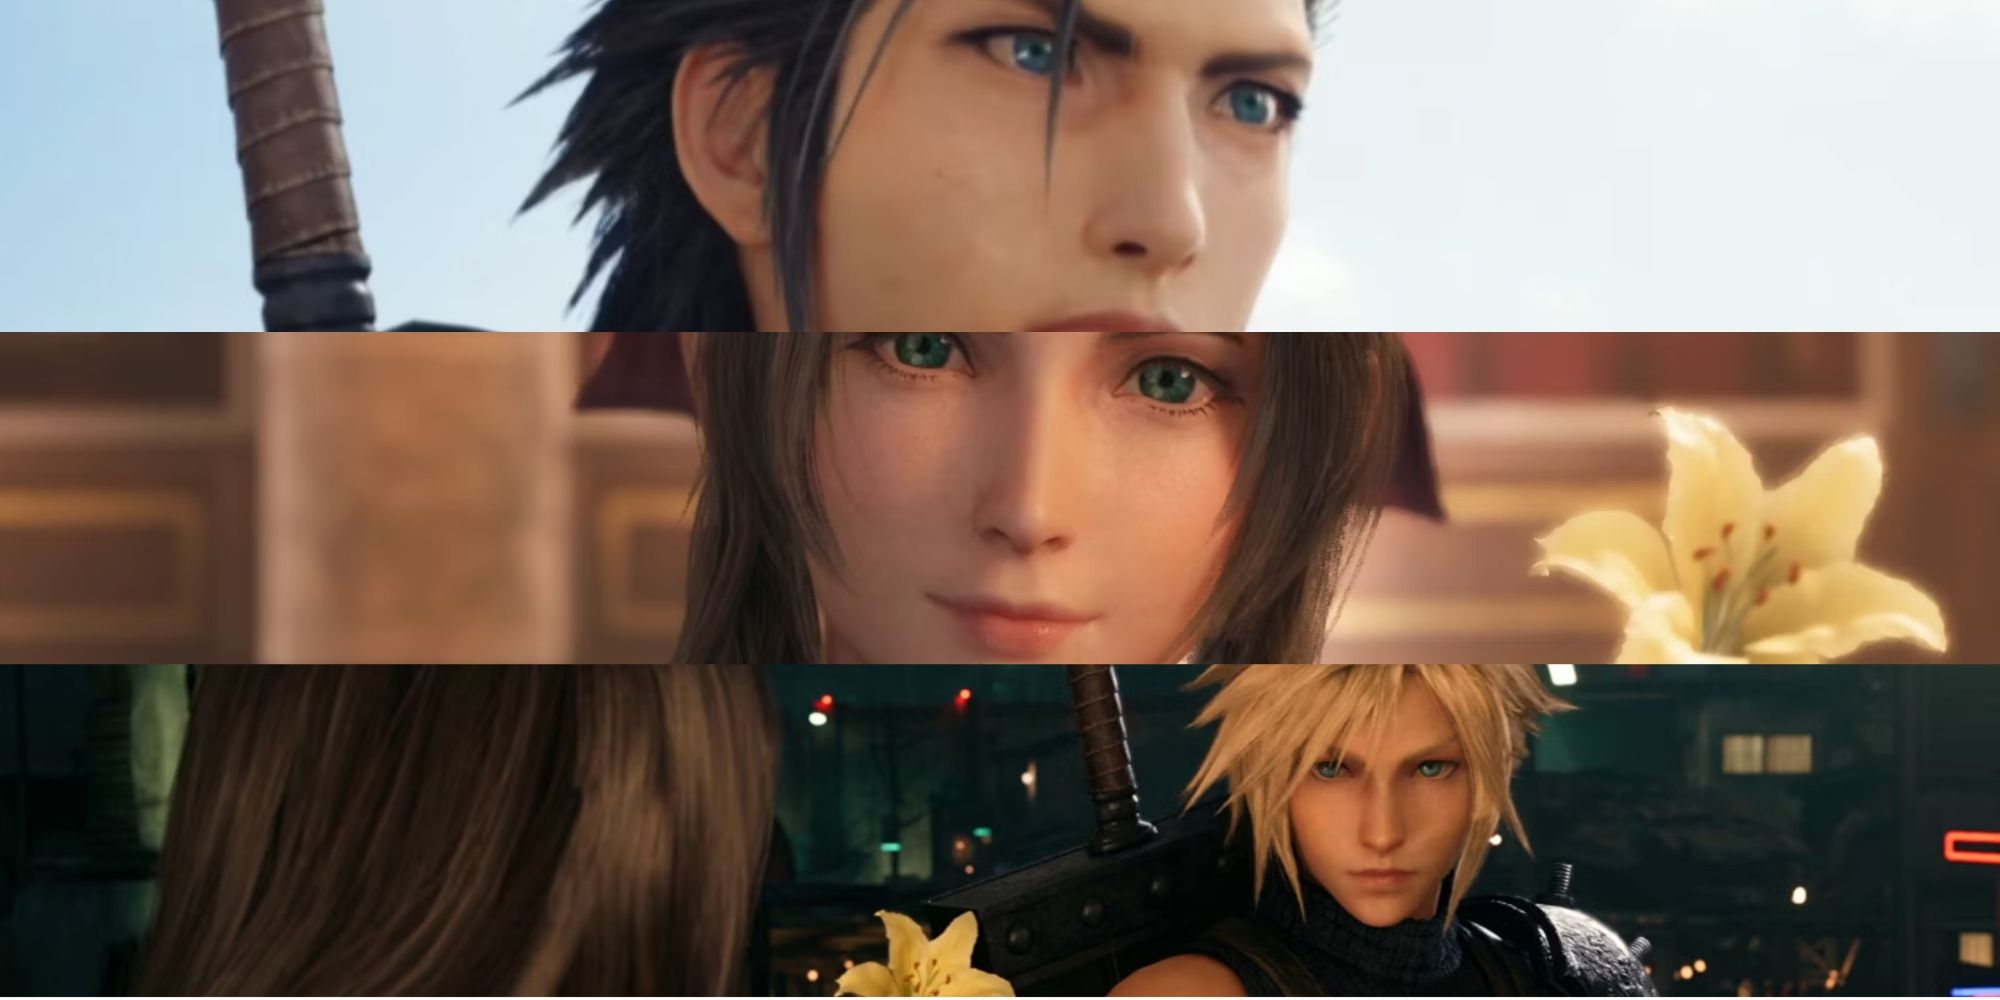 Final Fantasy 7 Remake Zack Fair looking into the distance, Aerith holding a flower, and Cloud holding a flower, top to bottom